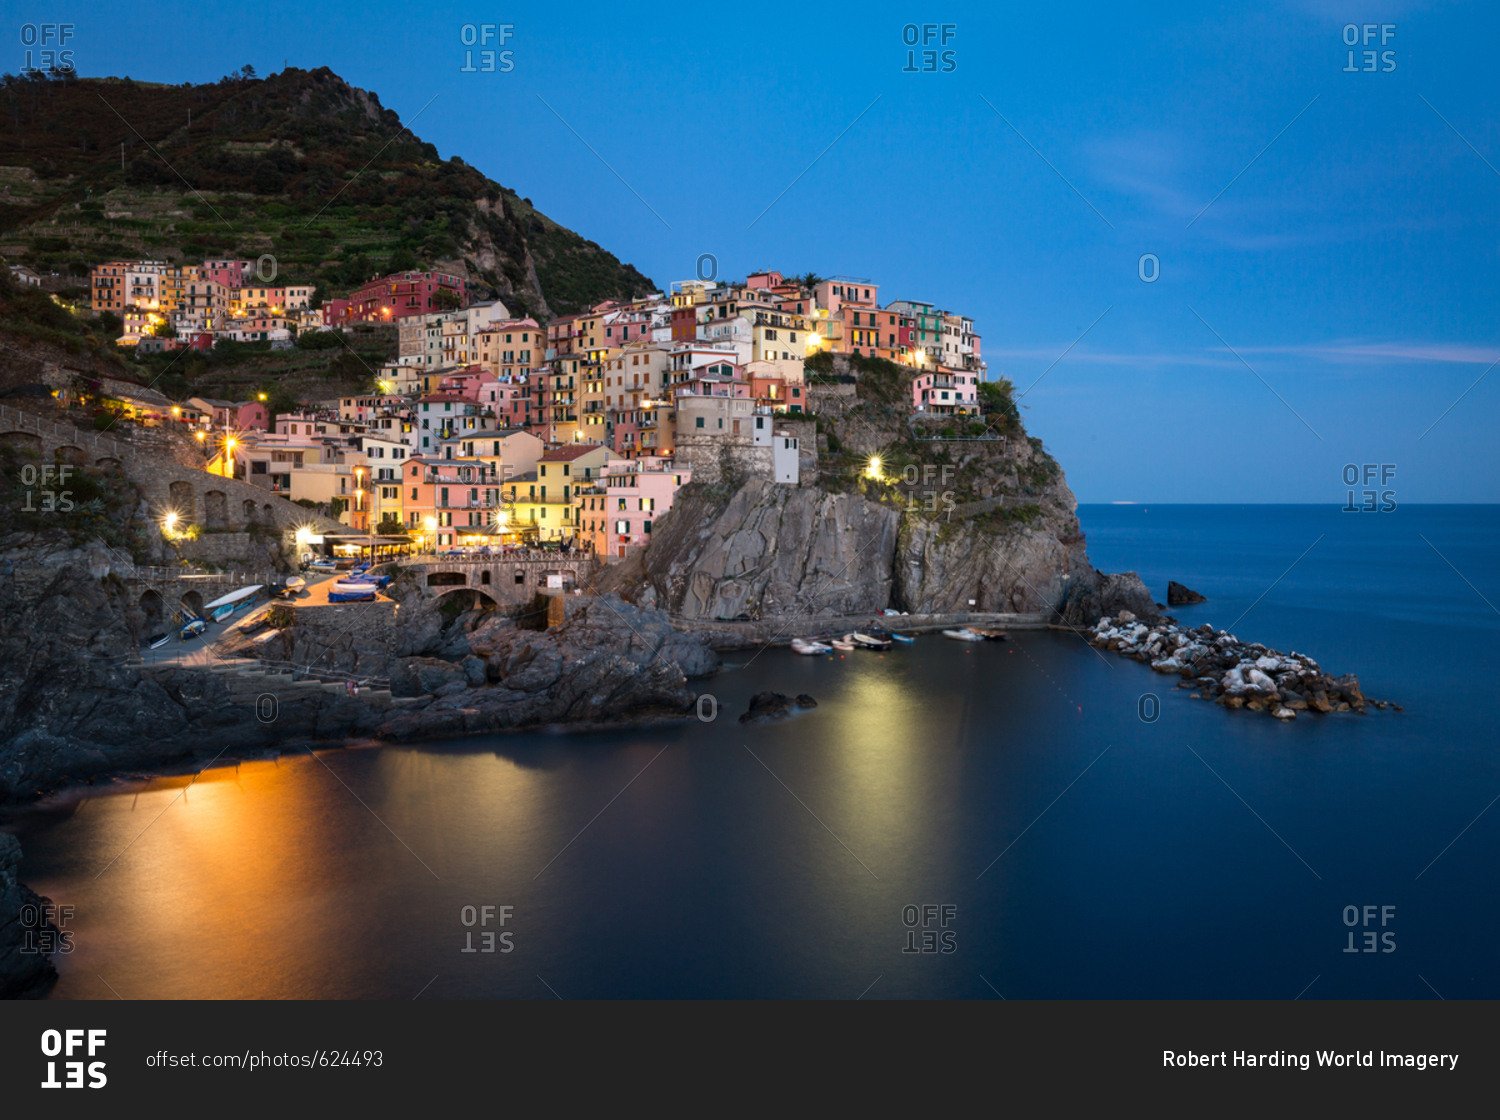 A long exposure at blue hour as the lights come on in the colorful town of Manarola, Cinque Terre, UNESCO World Heritage Site, Liguria, Italy, Europe